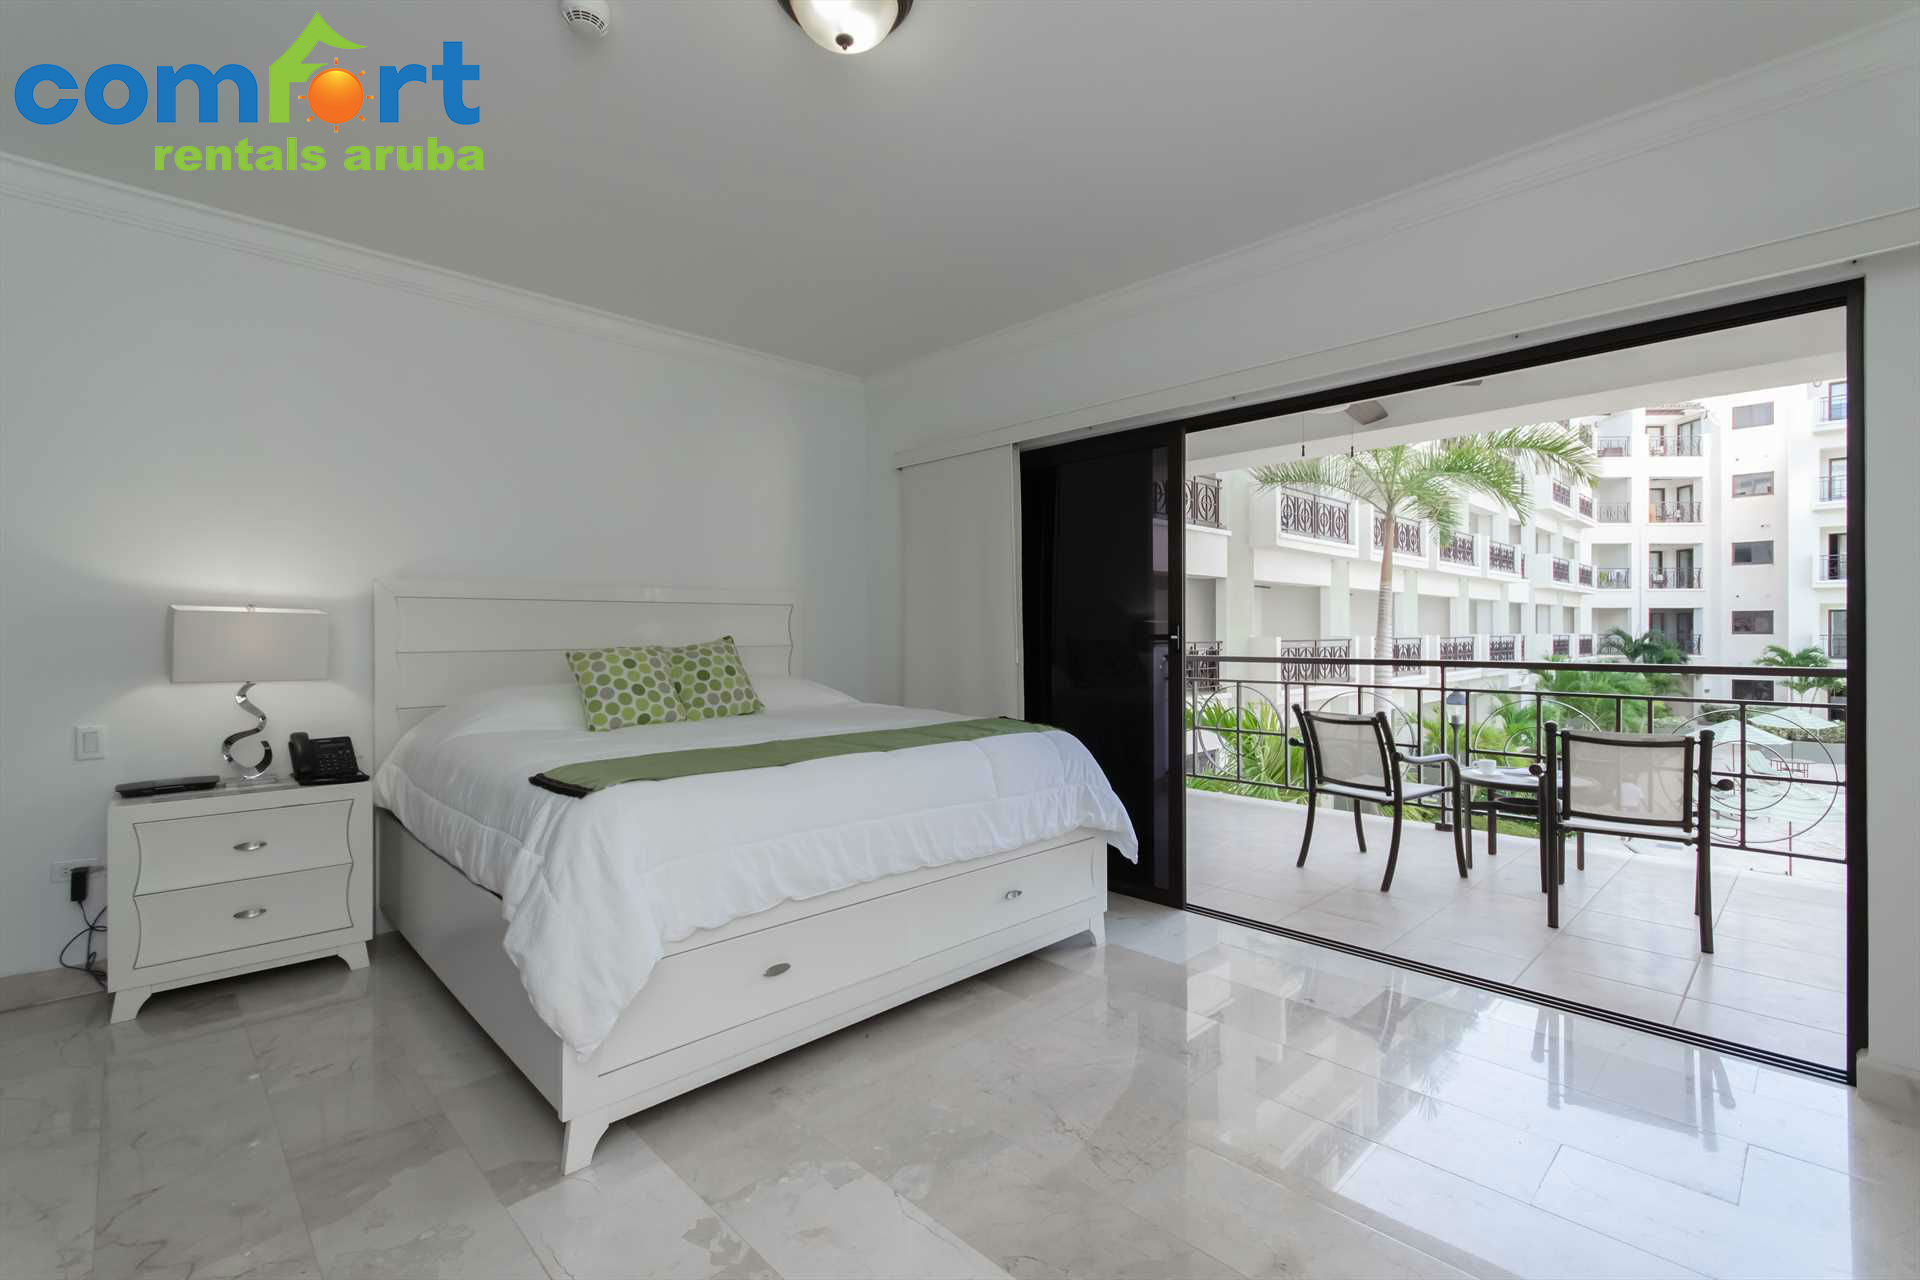 The master bedroom with a king-size bed and access to the balcony